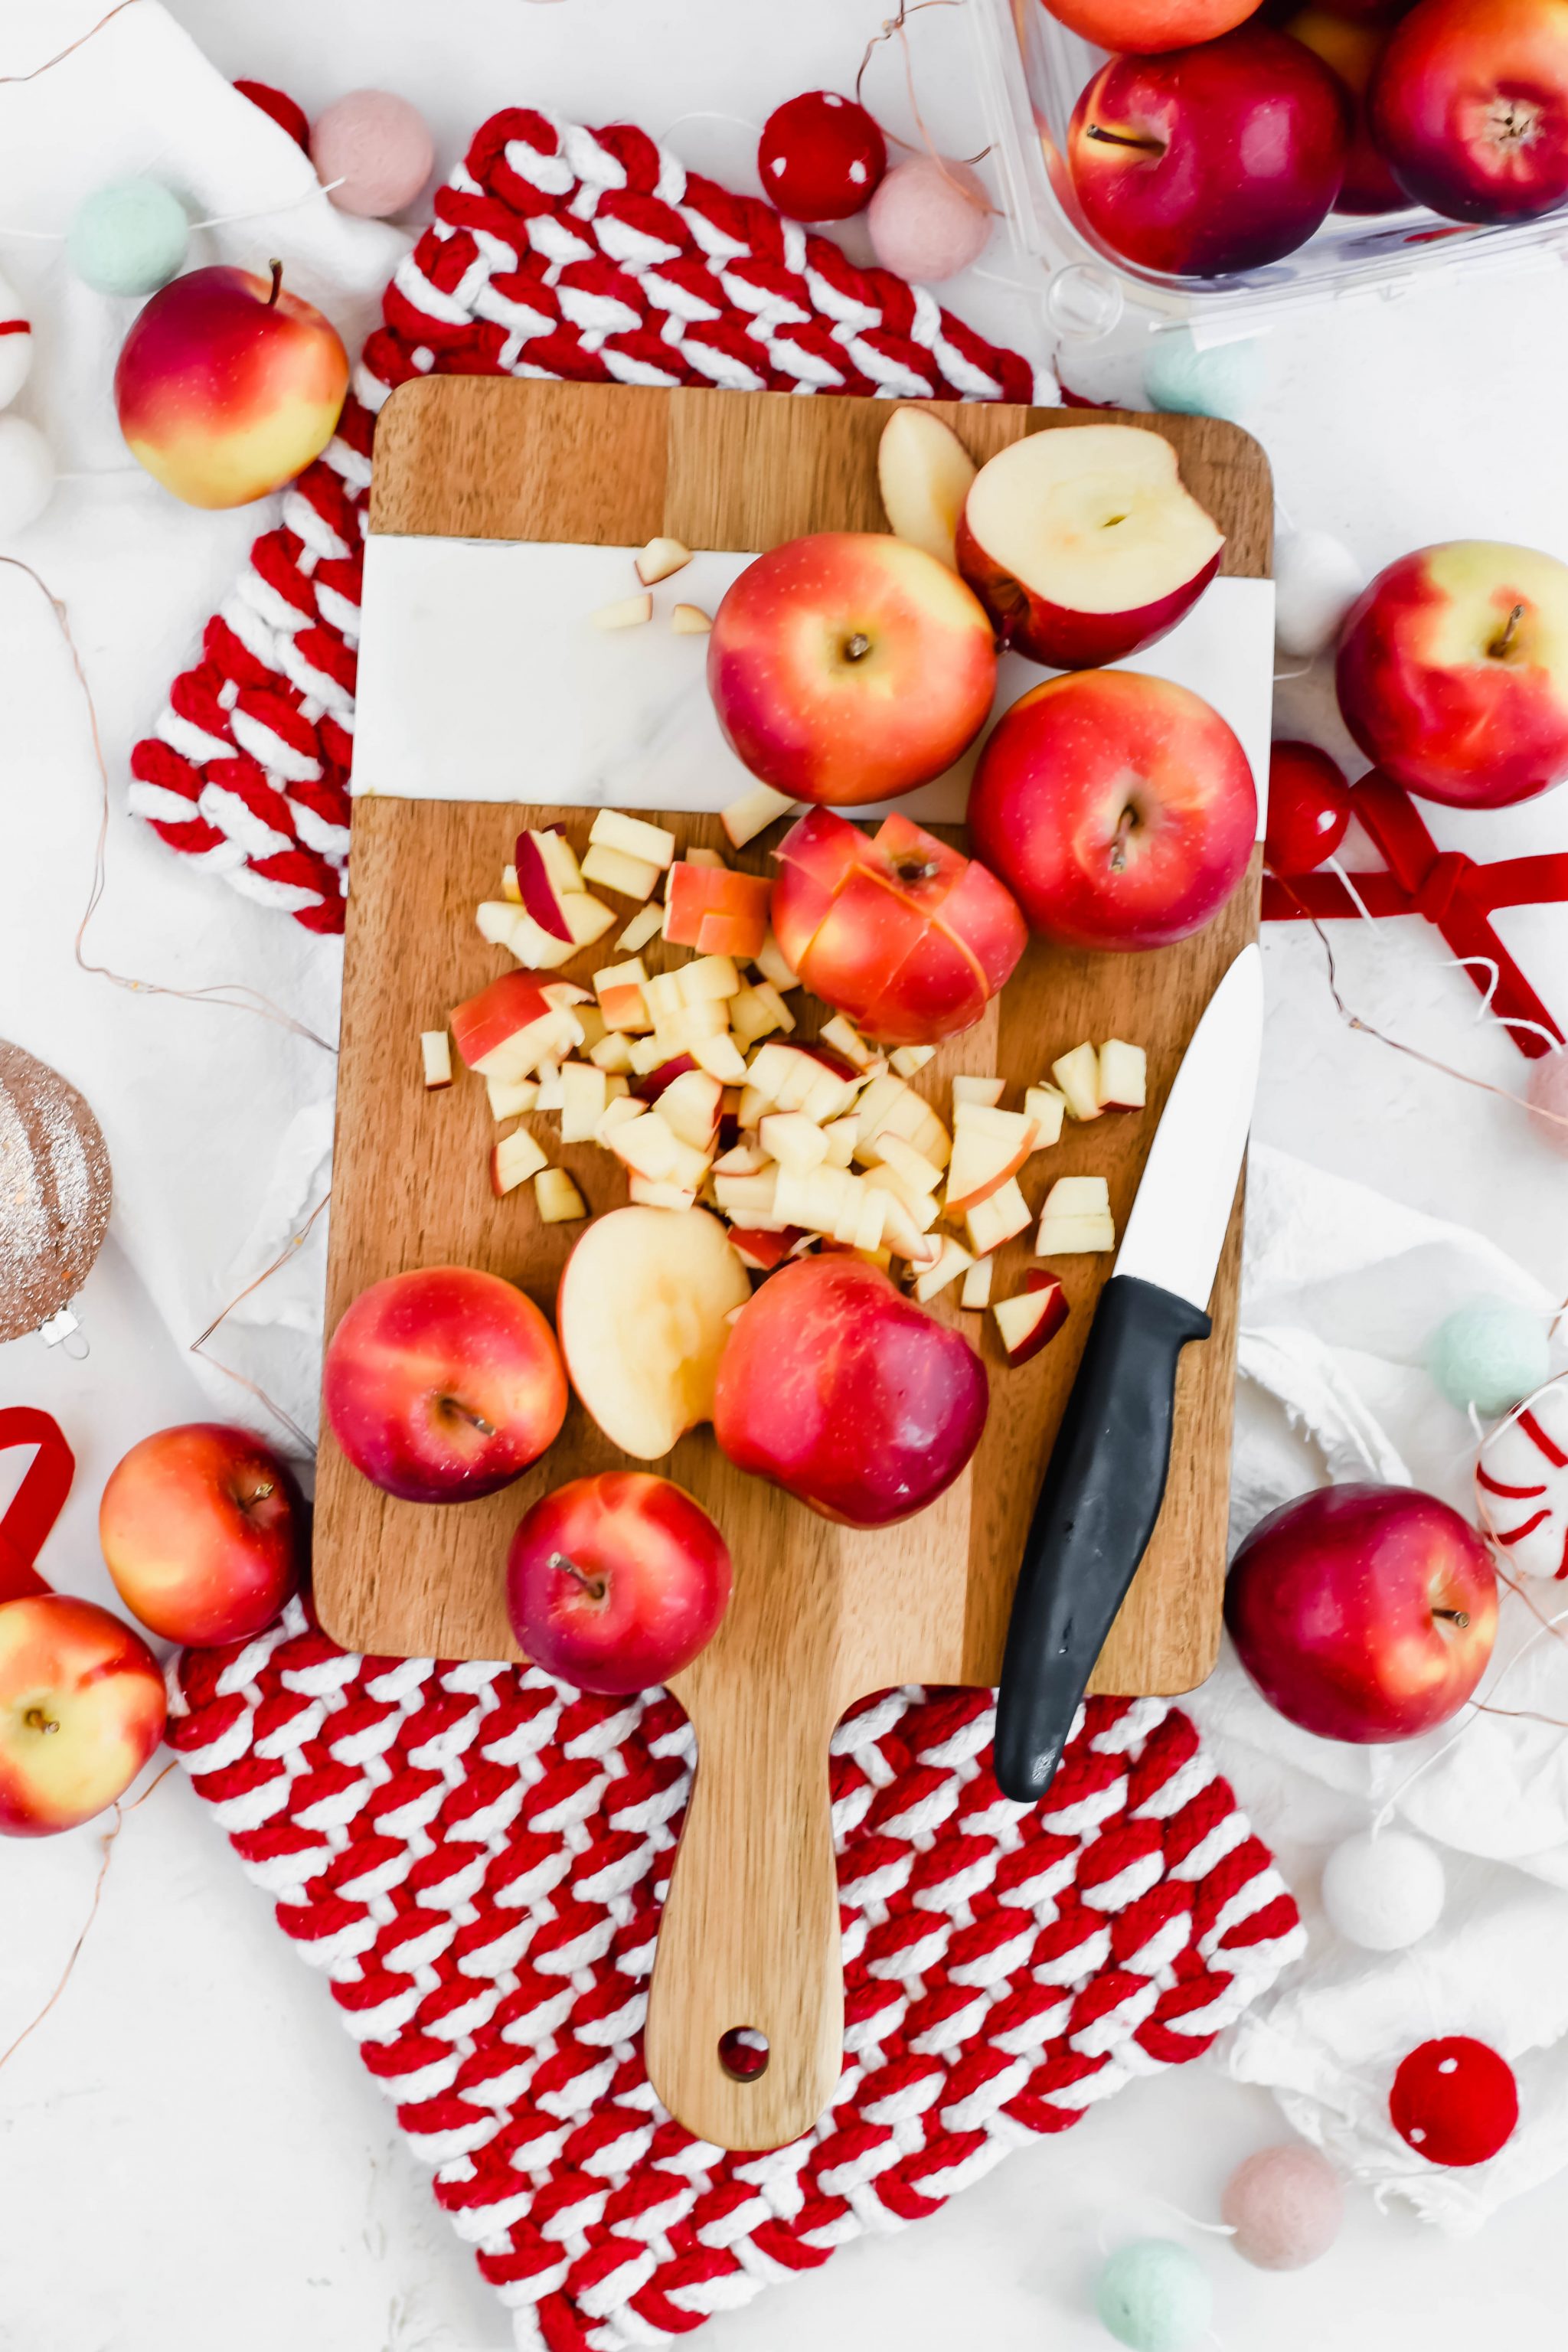 chopped rockit apples on a wooden cutting board with a ceramic knife.